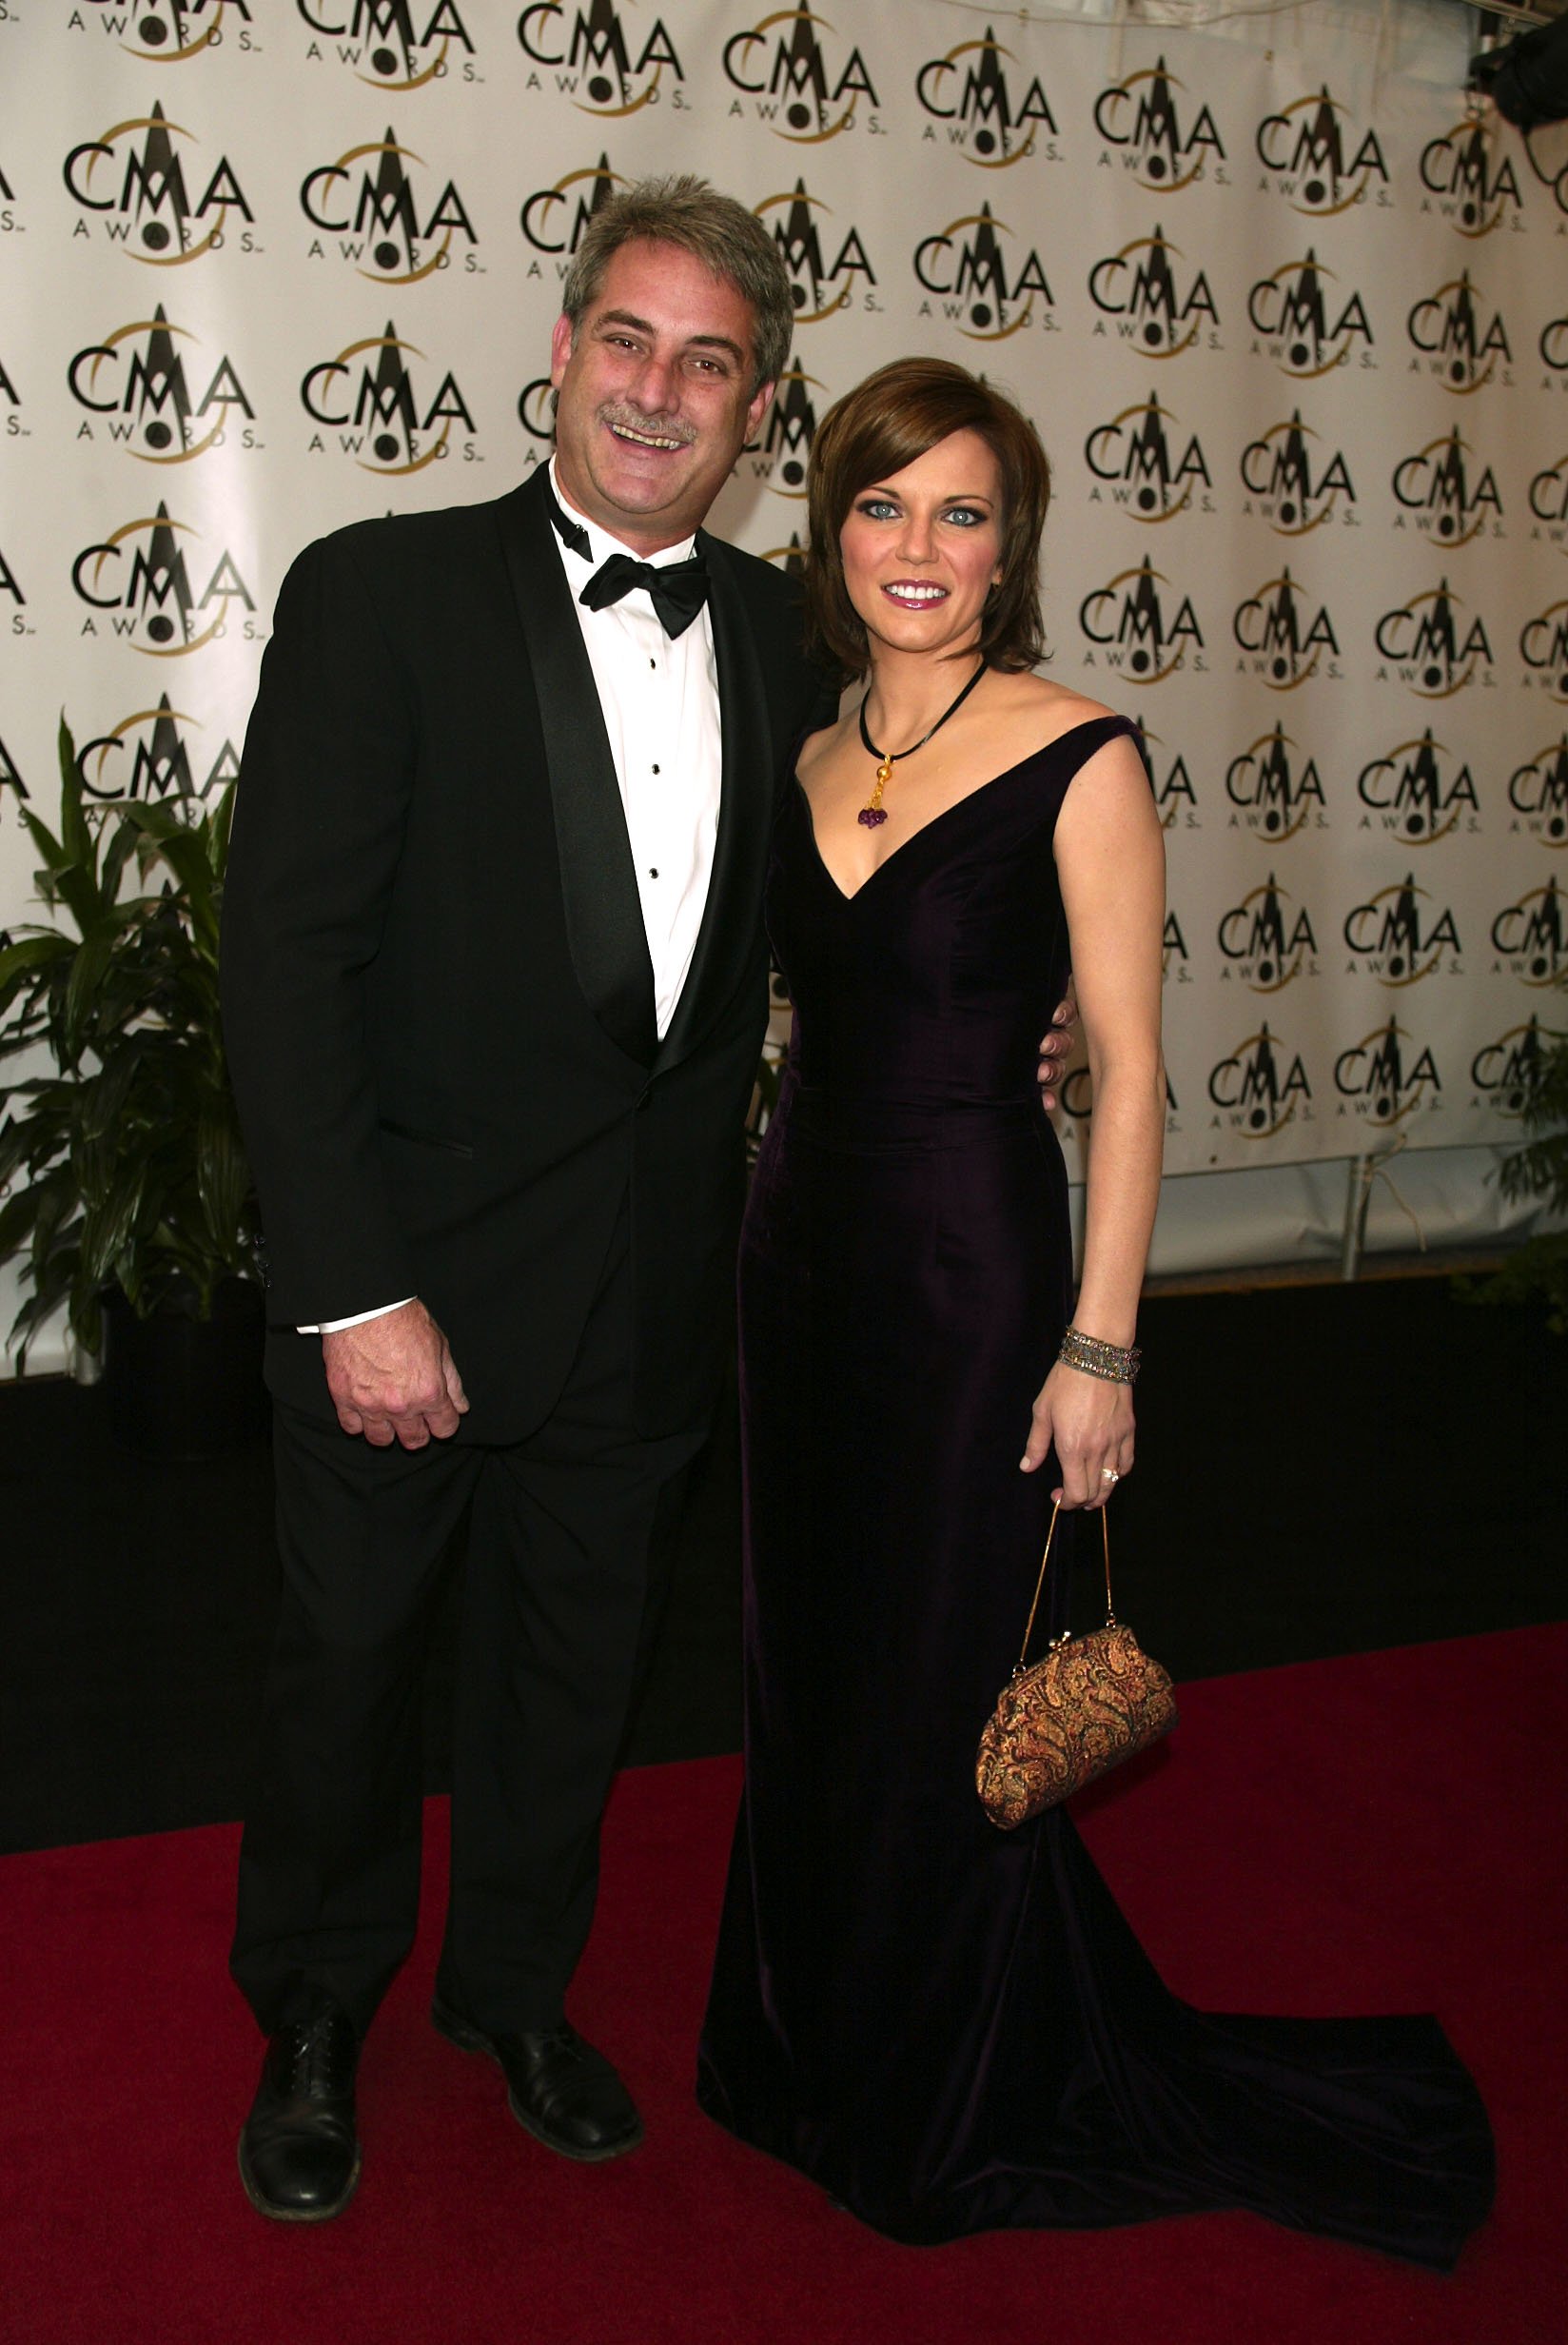 Martina McBride arrives with her husband John at the 36th annual Country Music Association Awards at the Grand Ole Opry House in Nashville, Tennessee, November 6, 2002 | Source: Getty Images